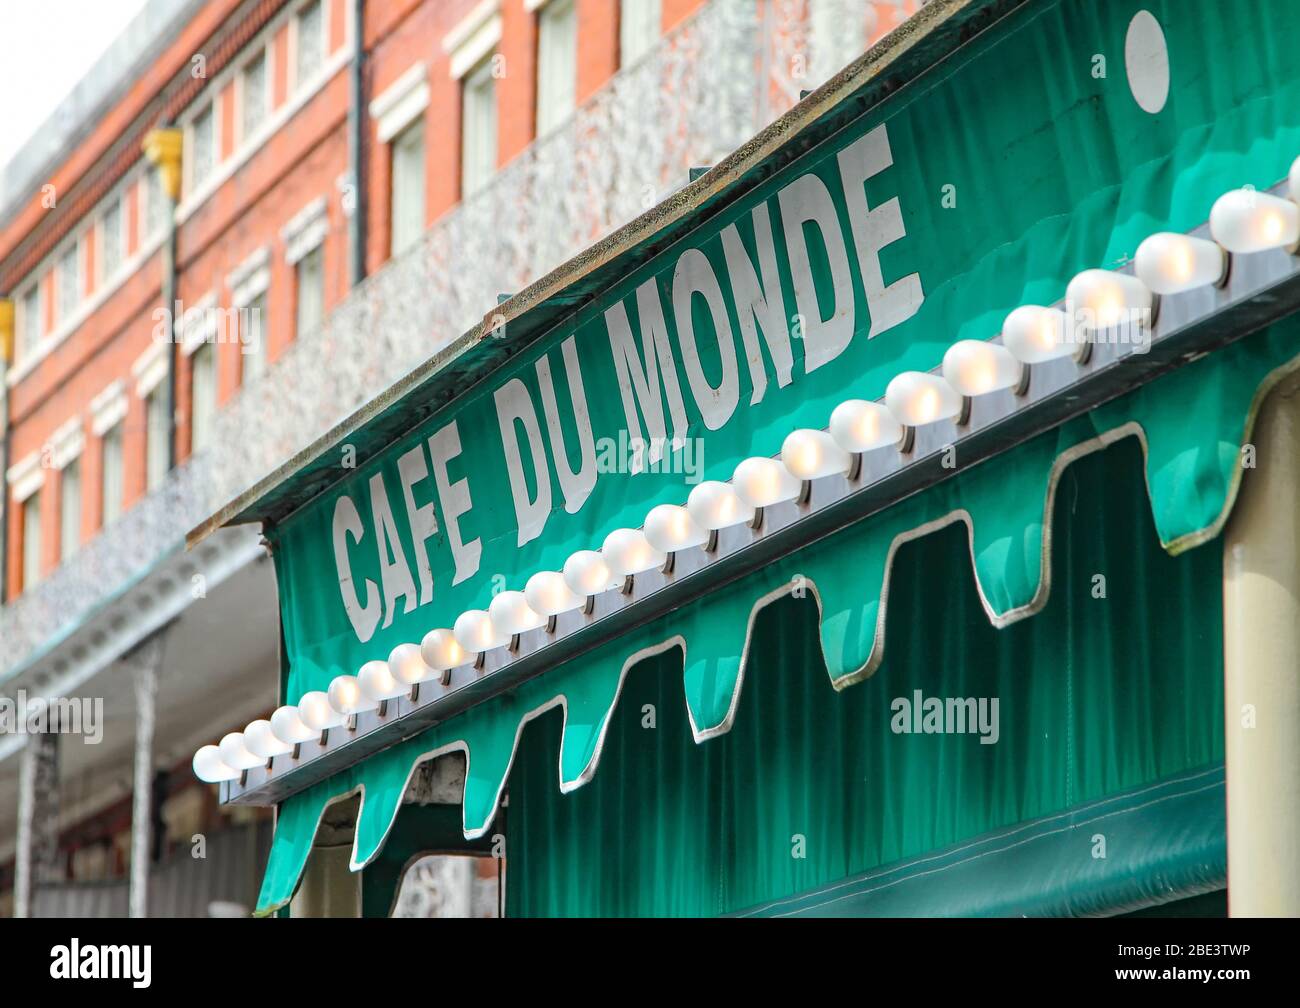 New Orleans, LA - March 27, 2016: A day/closeup shot of the Café Du Monde-Original French Market Coffee Stand exterior sign in the French Quarter. Stock Photo